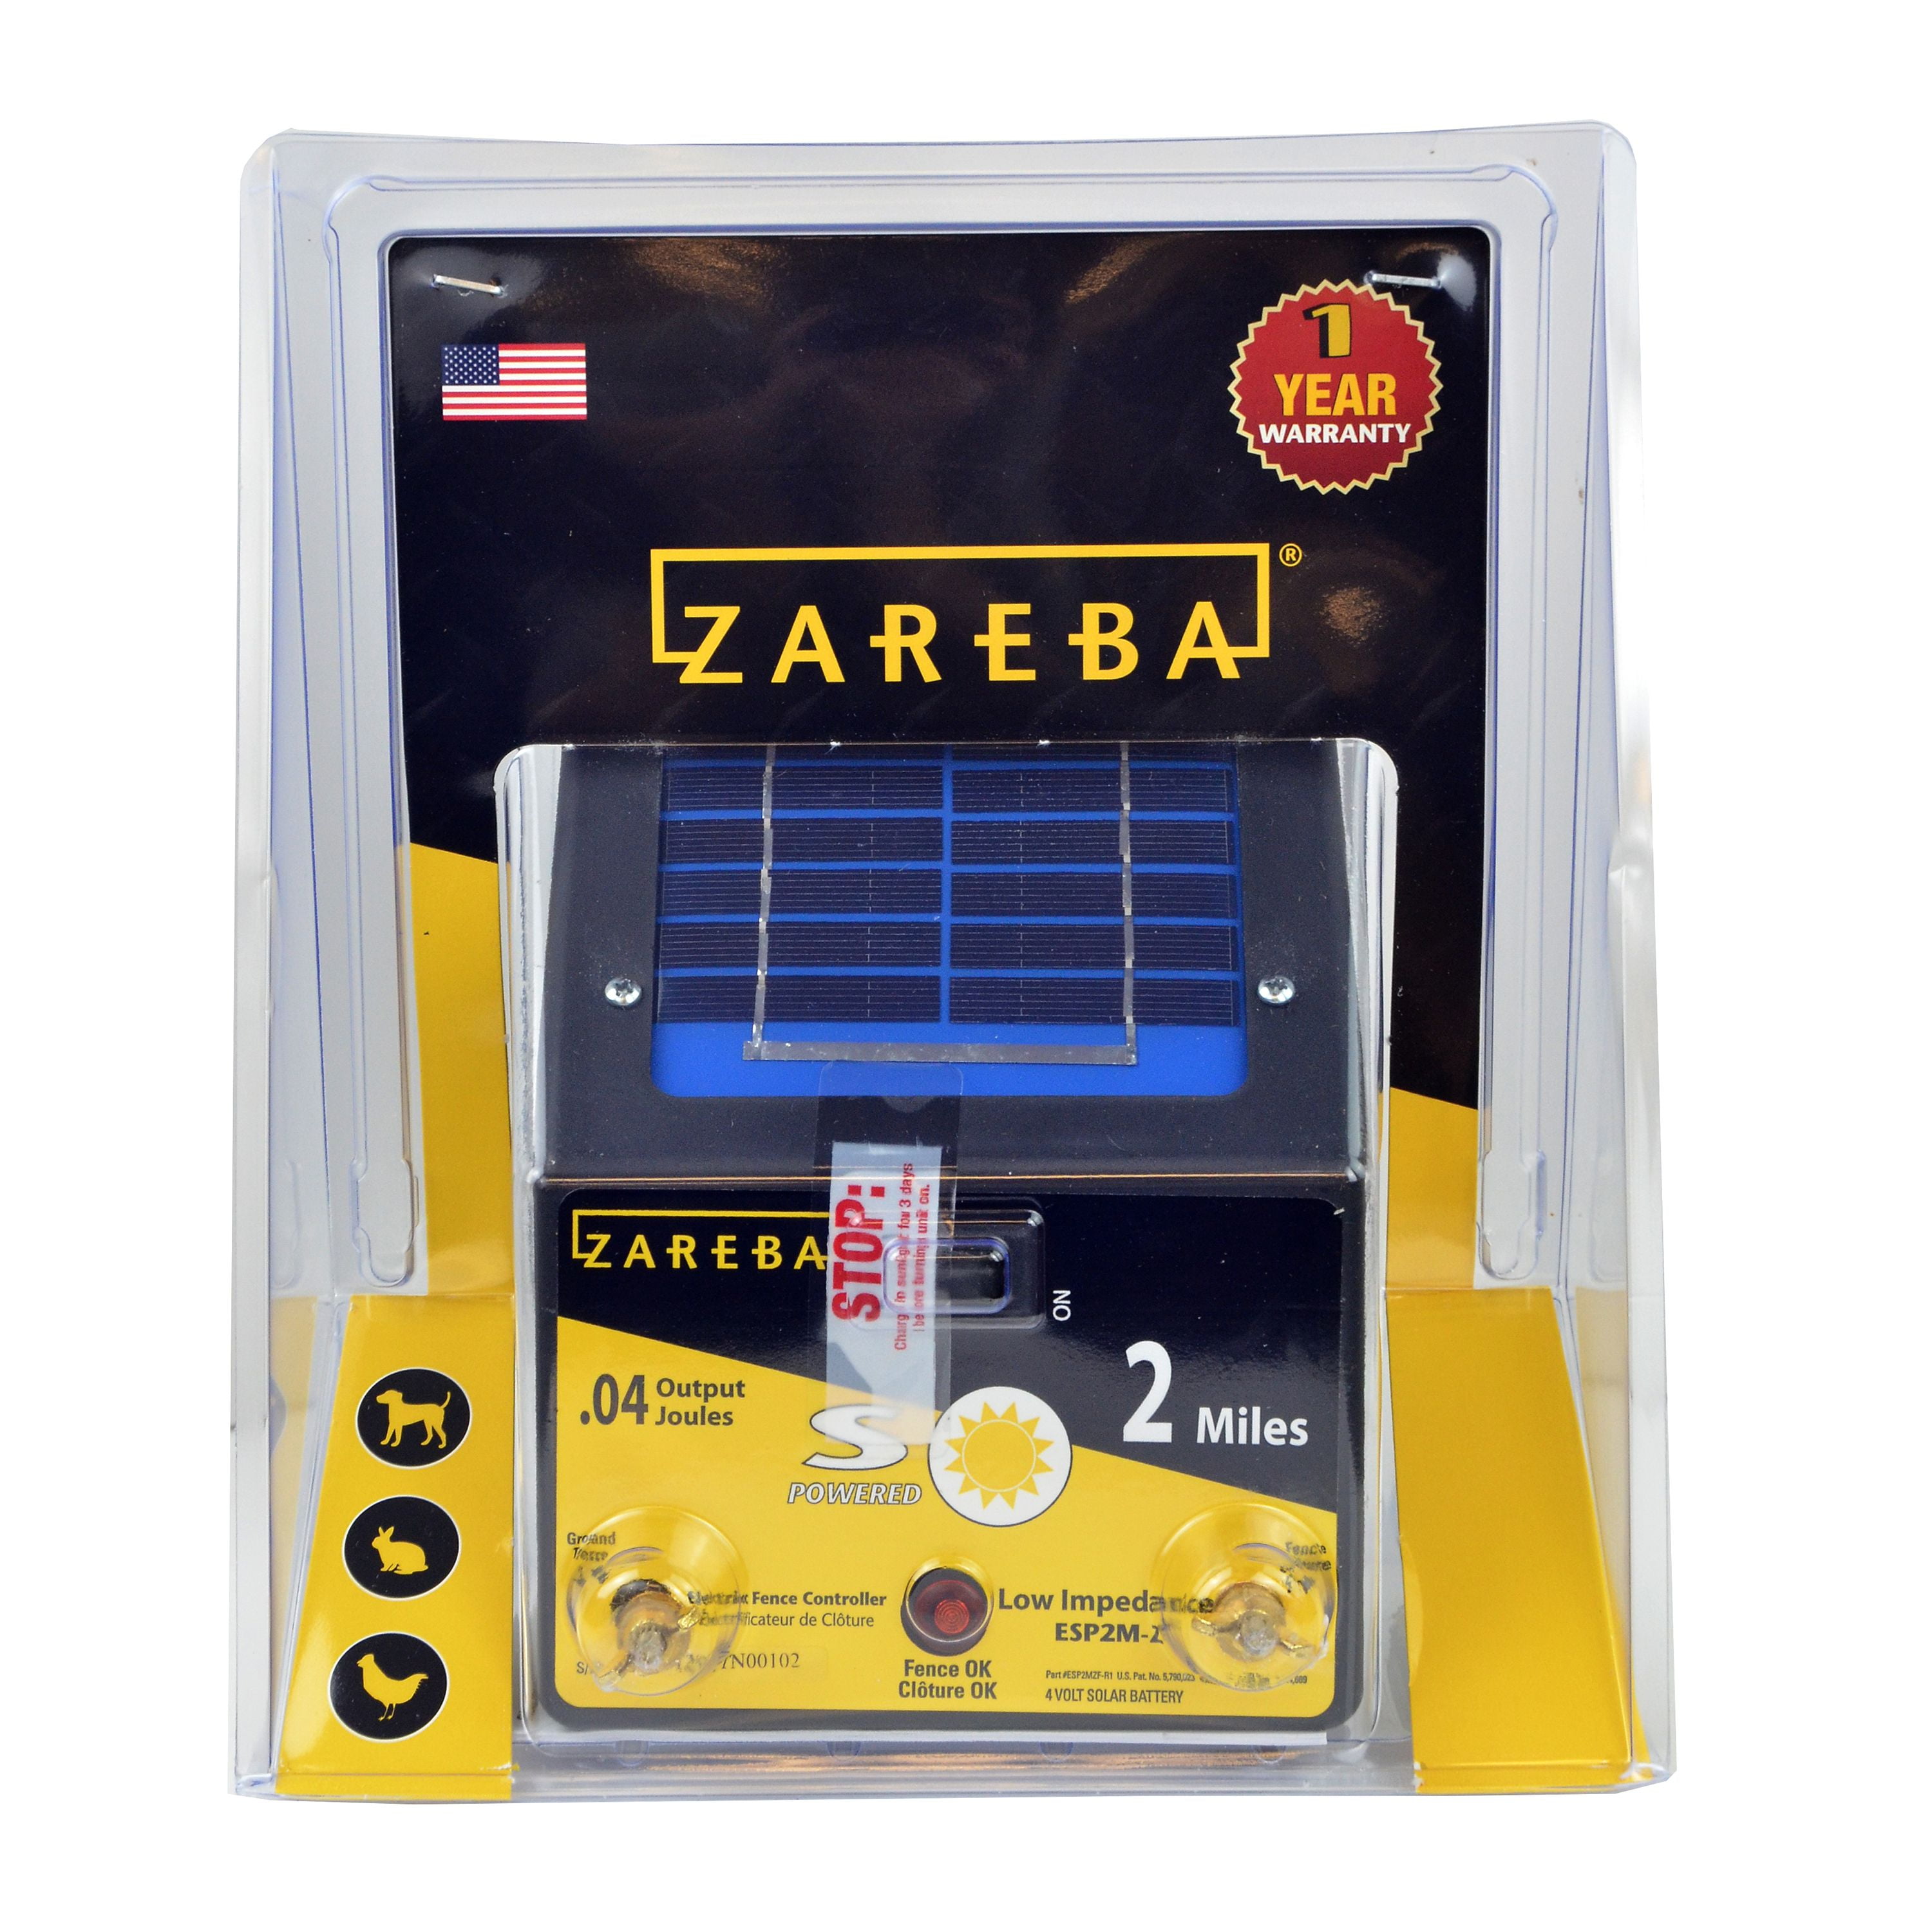 NEW Zareba Energizer ESP2M-Z 2-Mile Solar Powered Electric Fence Charger 6841308 